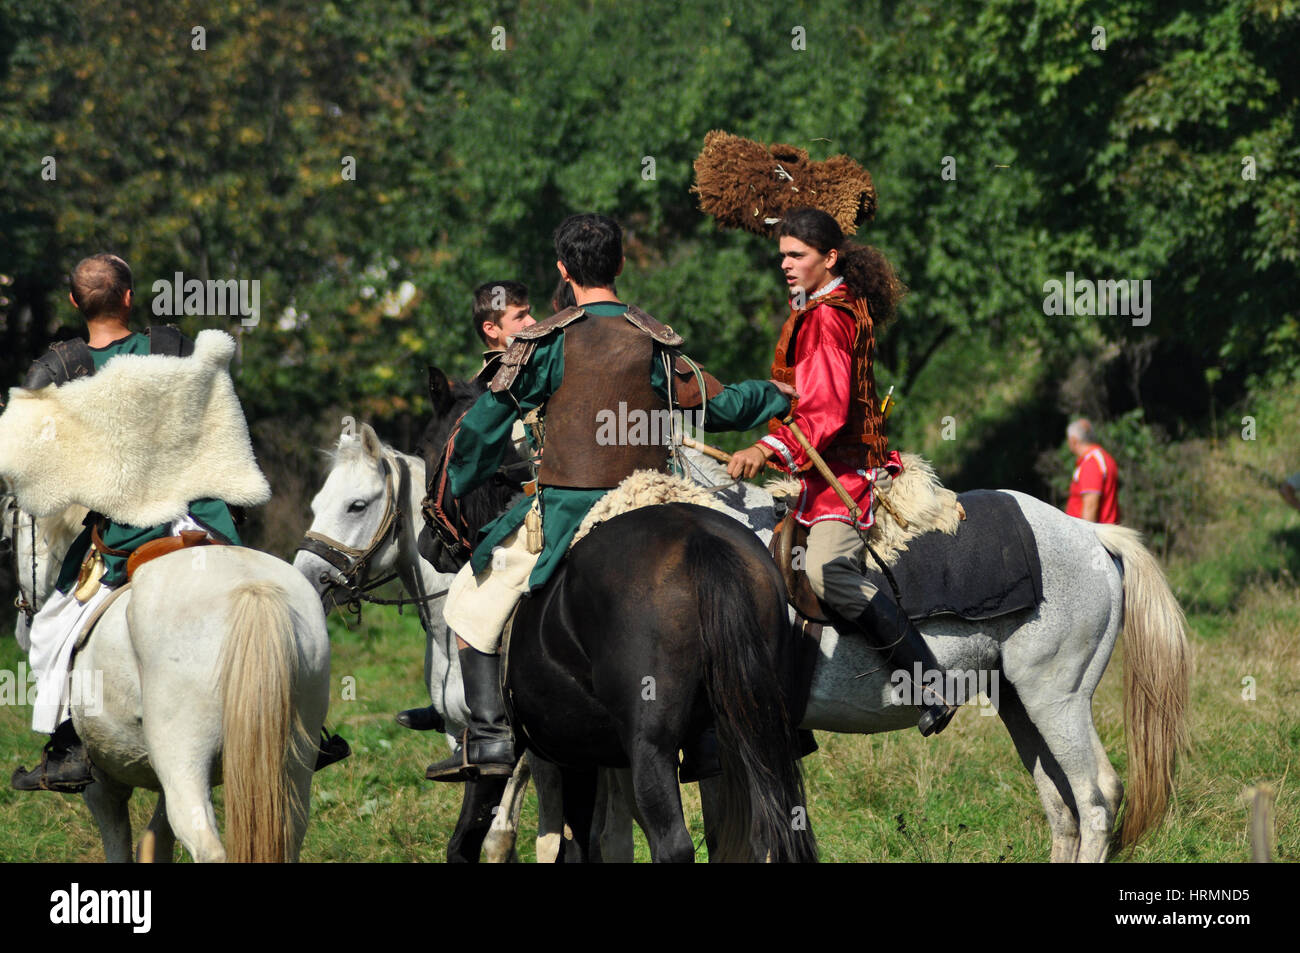 CLUJ-NAPOCA, ROMANIA - OCTOBER 3: Members of Eagles of Calata Nomadic group performing a free equestrian demonstration with Hunnic and archaic Hungari Stock Photo